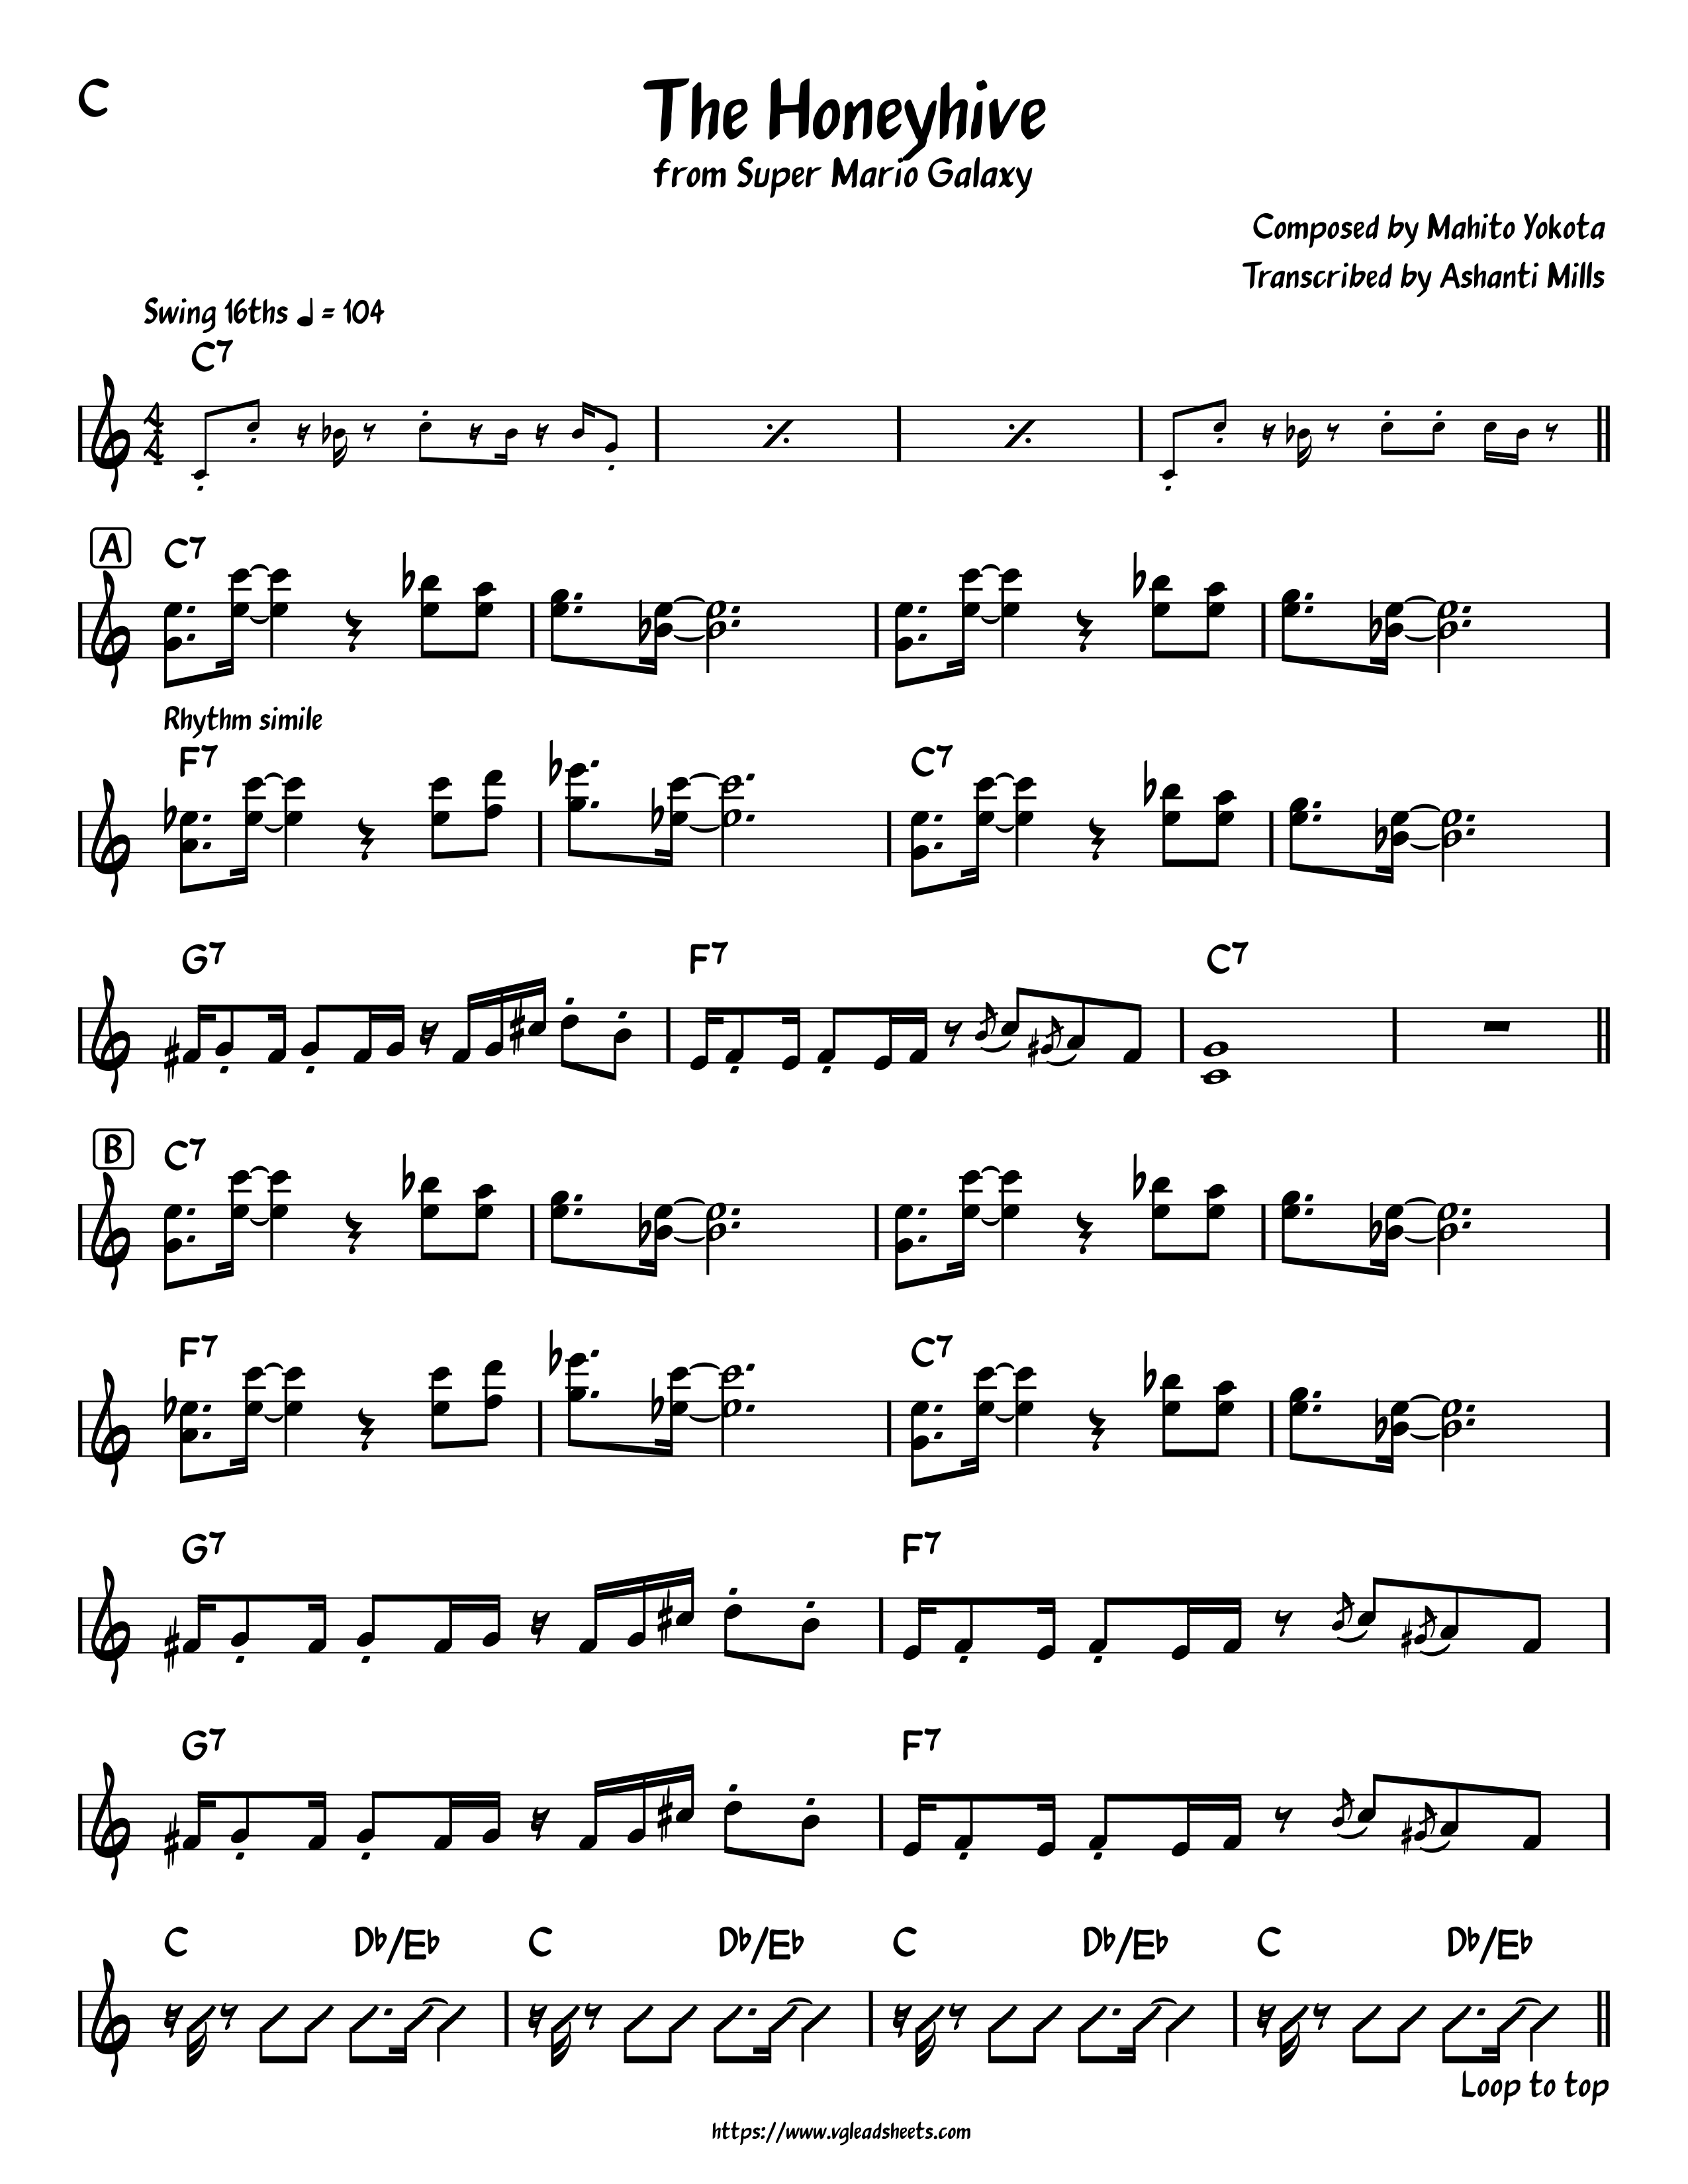 Super Mario Galaxy The Honeyhive Vgleadsheets Com Lead Sheets For Video Game Music